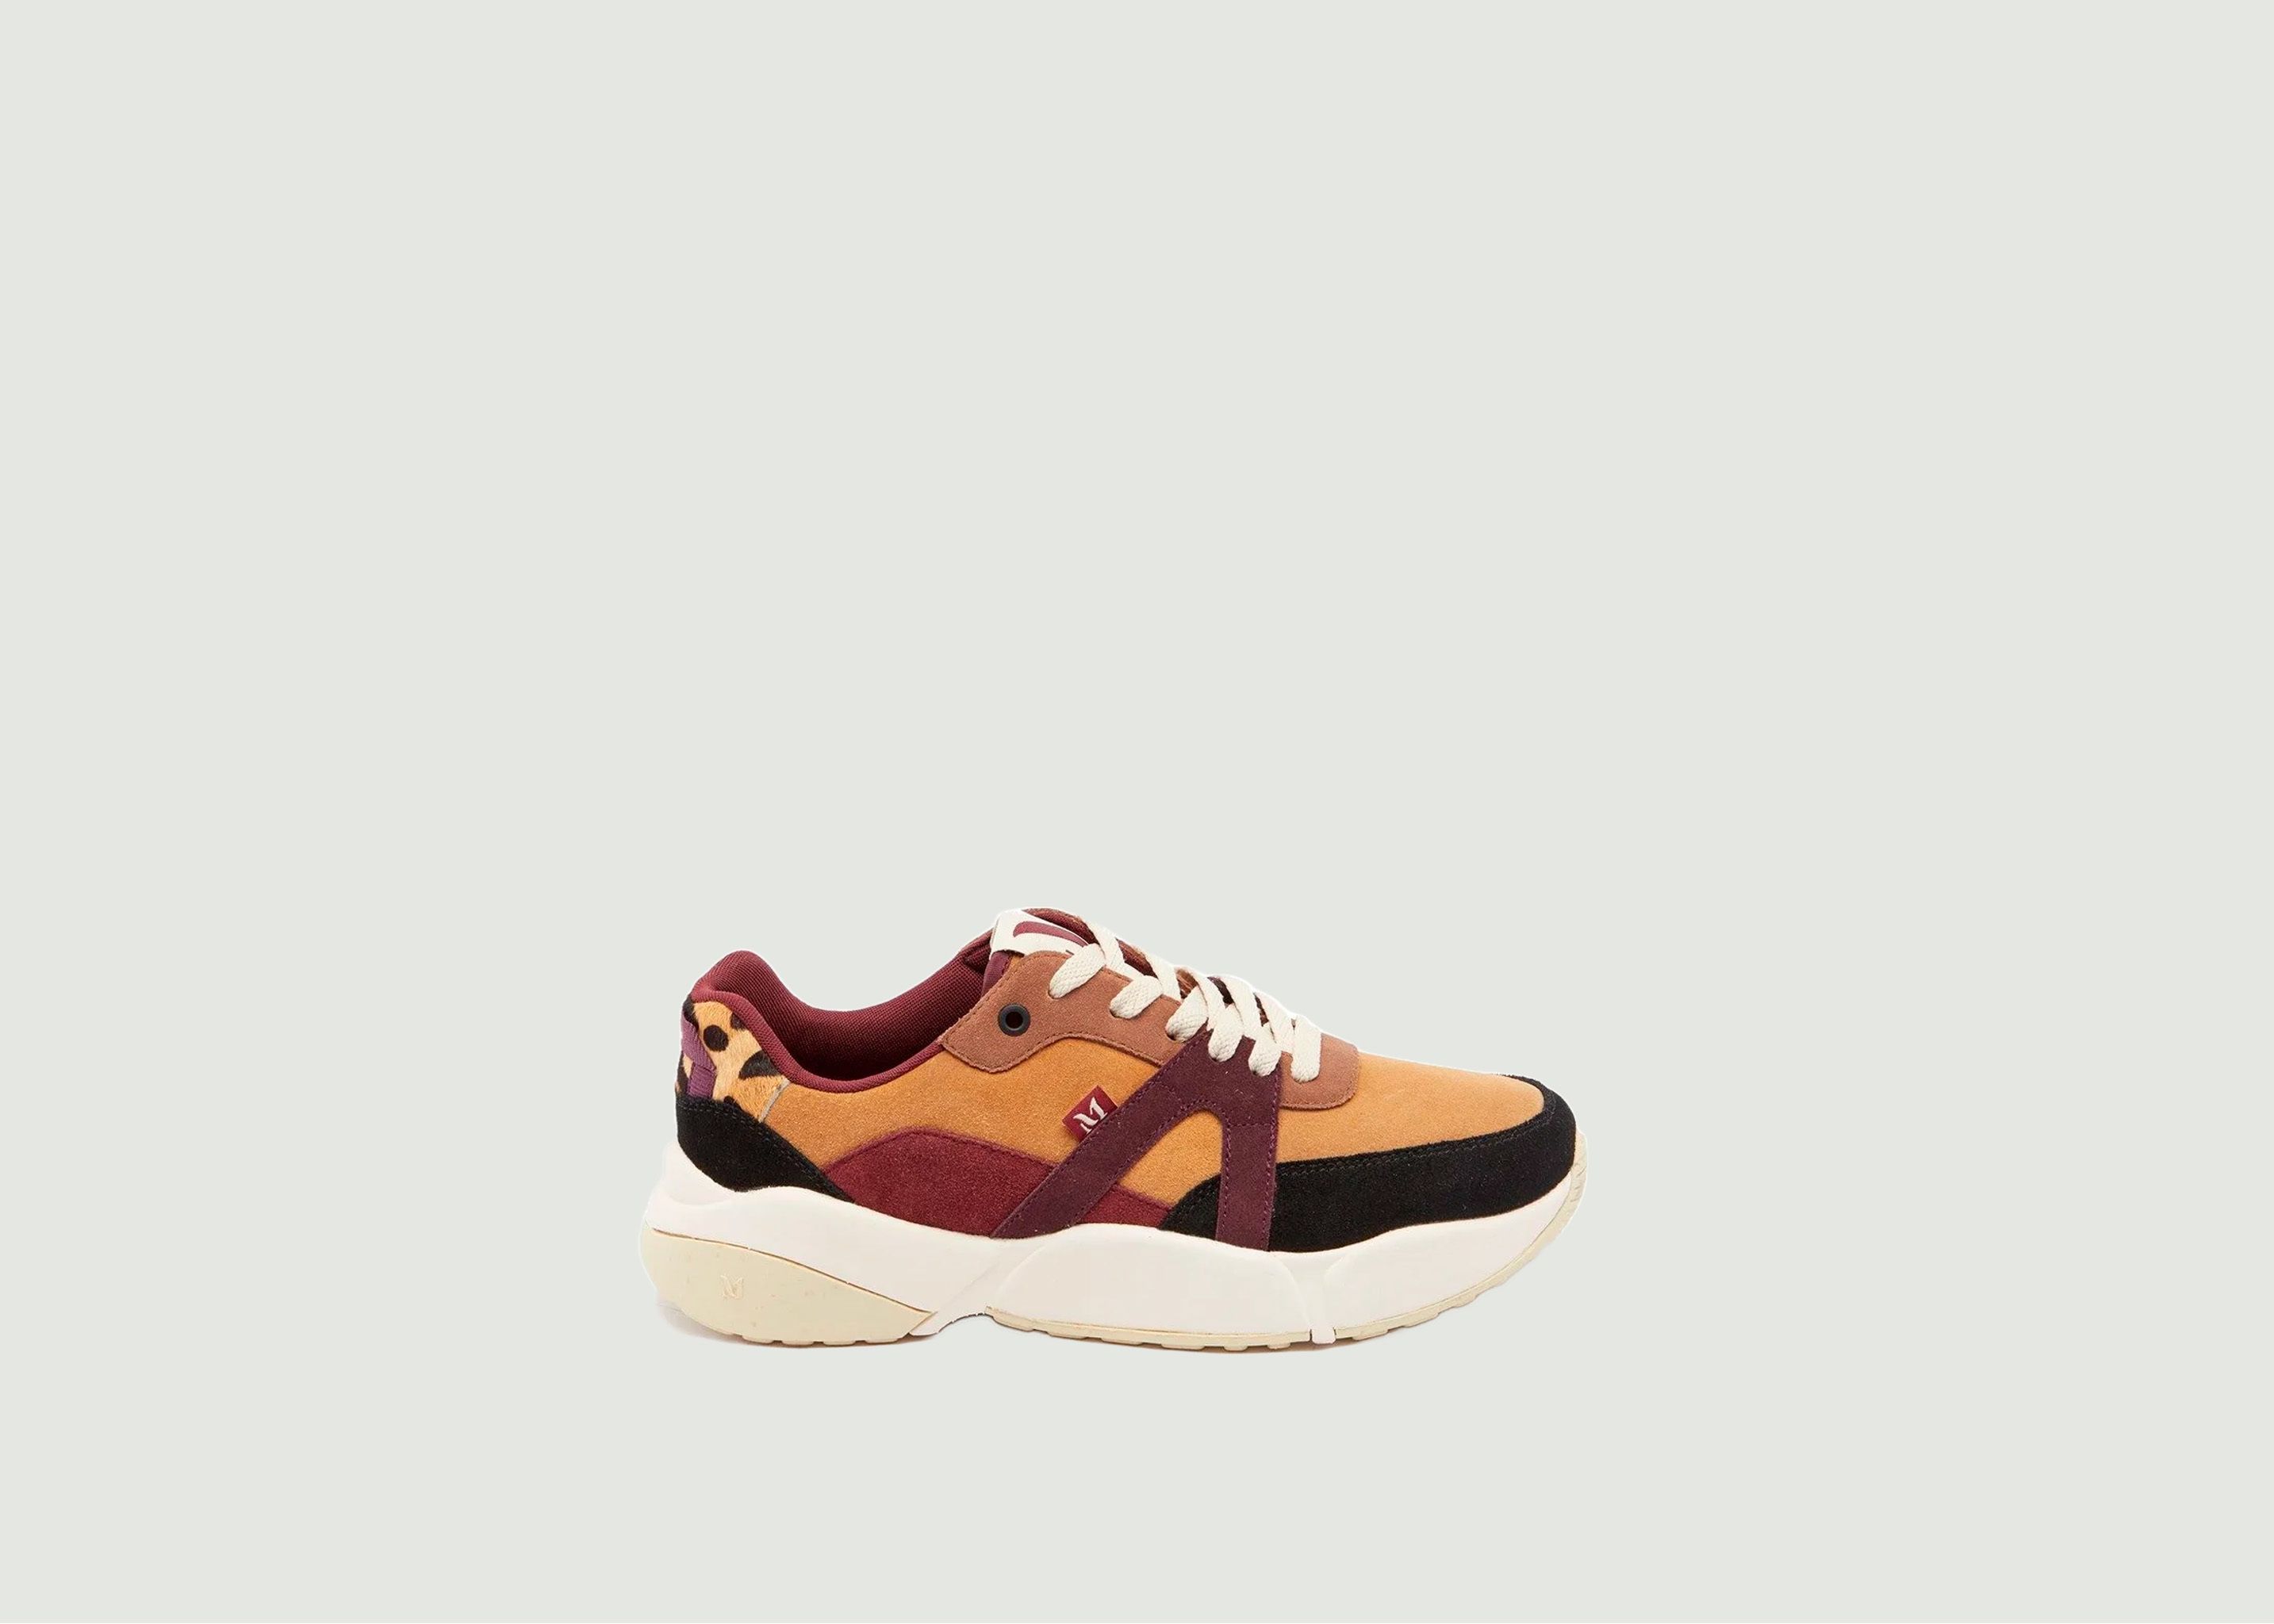 Lison running sneakers  - M.Moustache